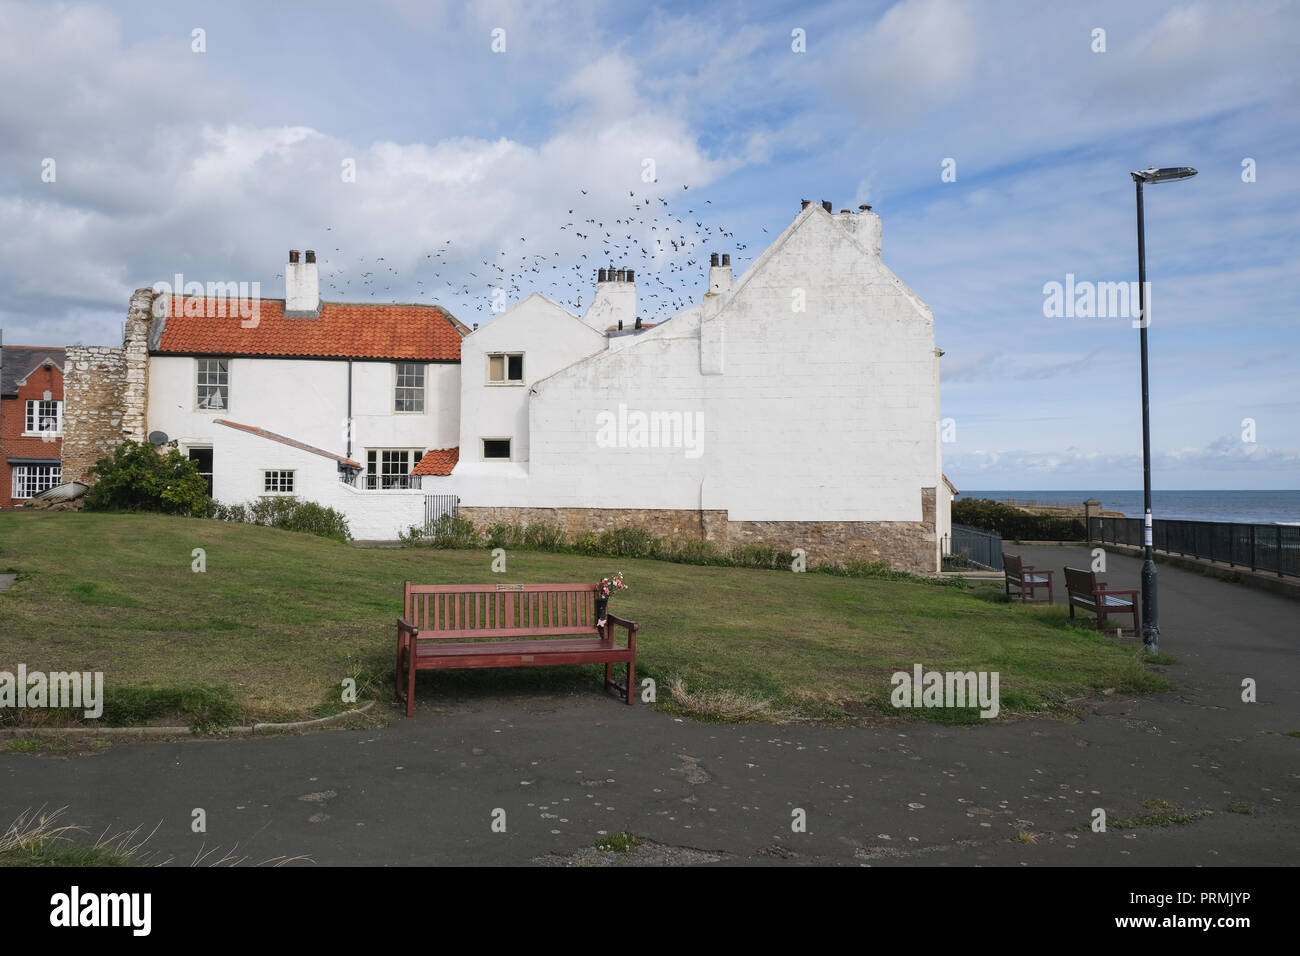 Cliff House Cullercoats North Shields, Tyne and Wear coast Stock Photo